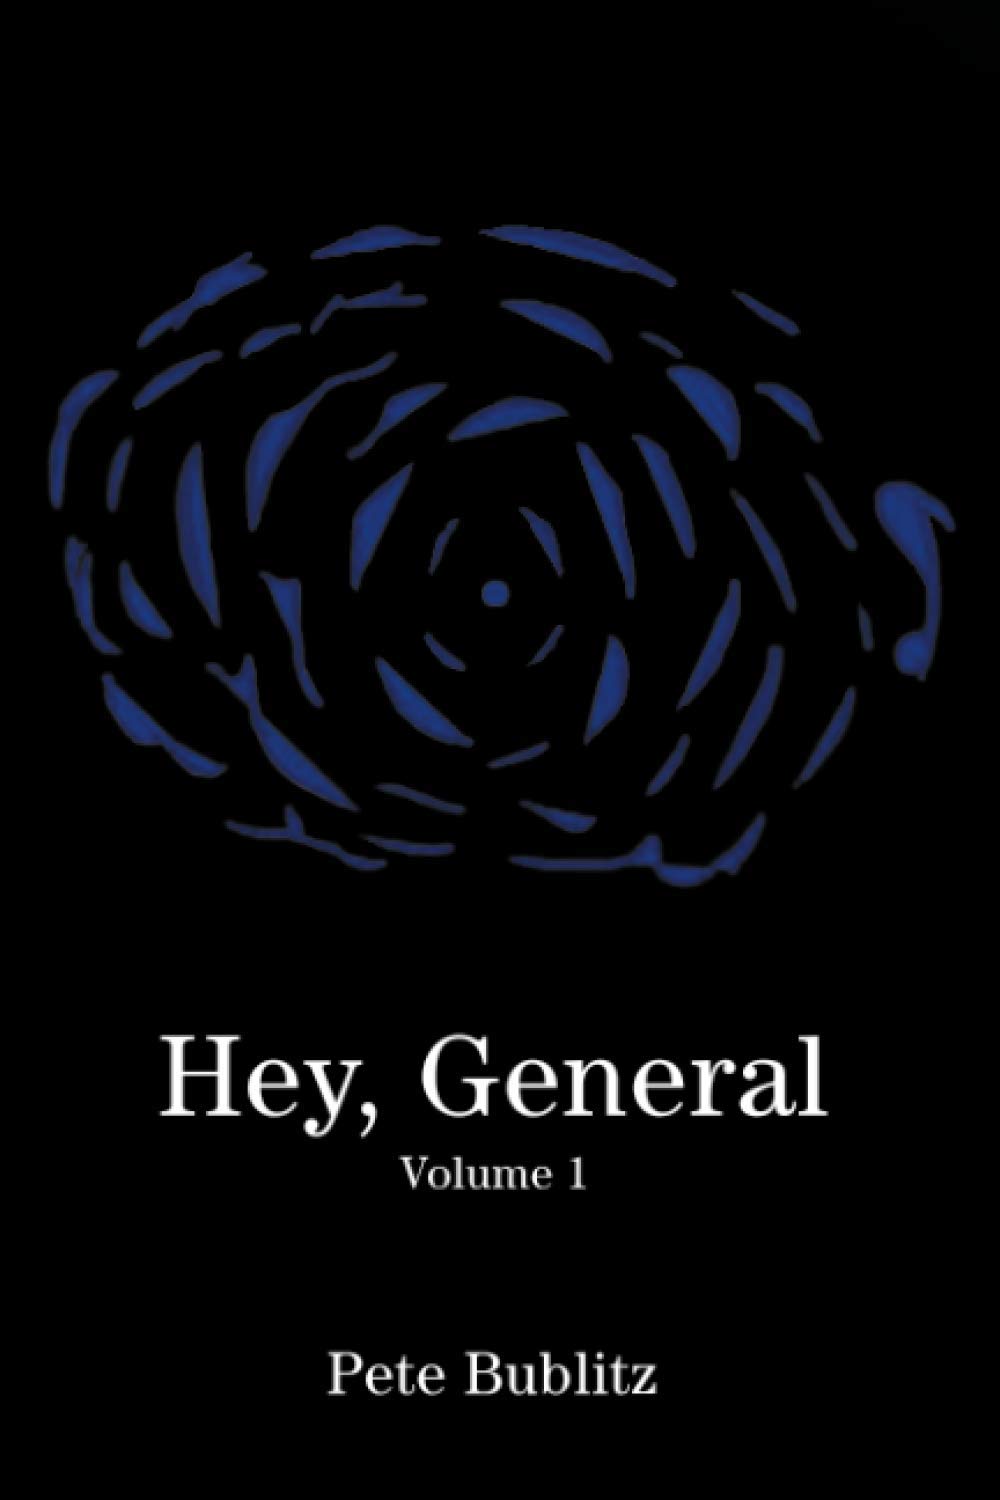 Pete Bublitz launches new book, Hey, General: Volume 1